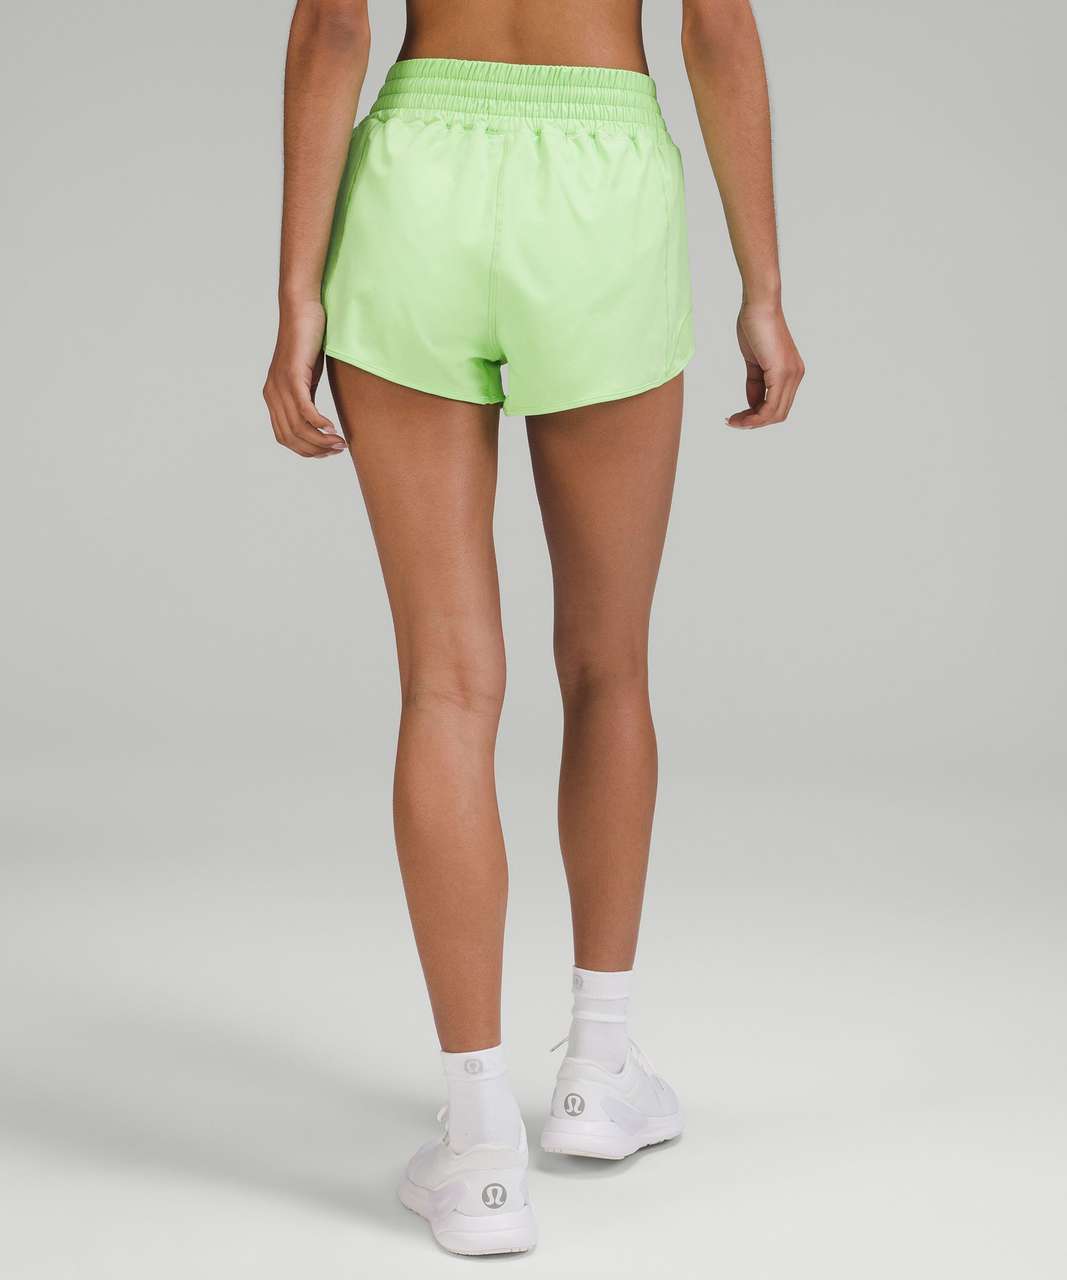 lululemon athletica Hotty Hot High-rise Lined Shorts 2.5 in Green